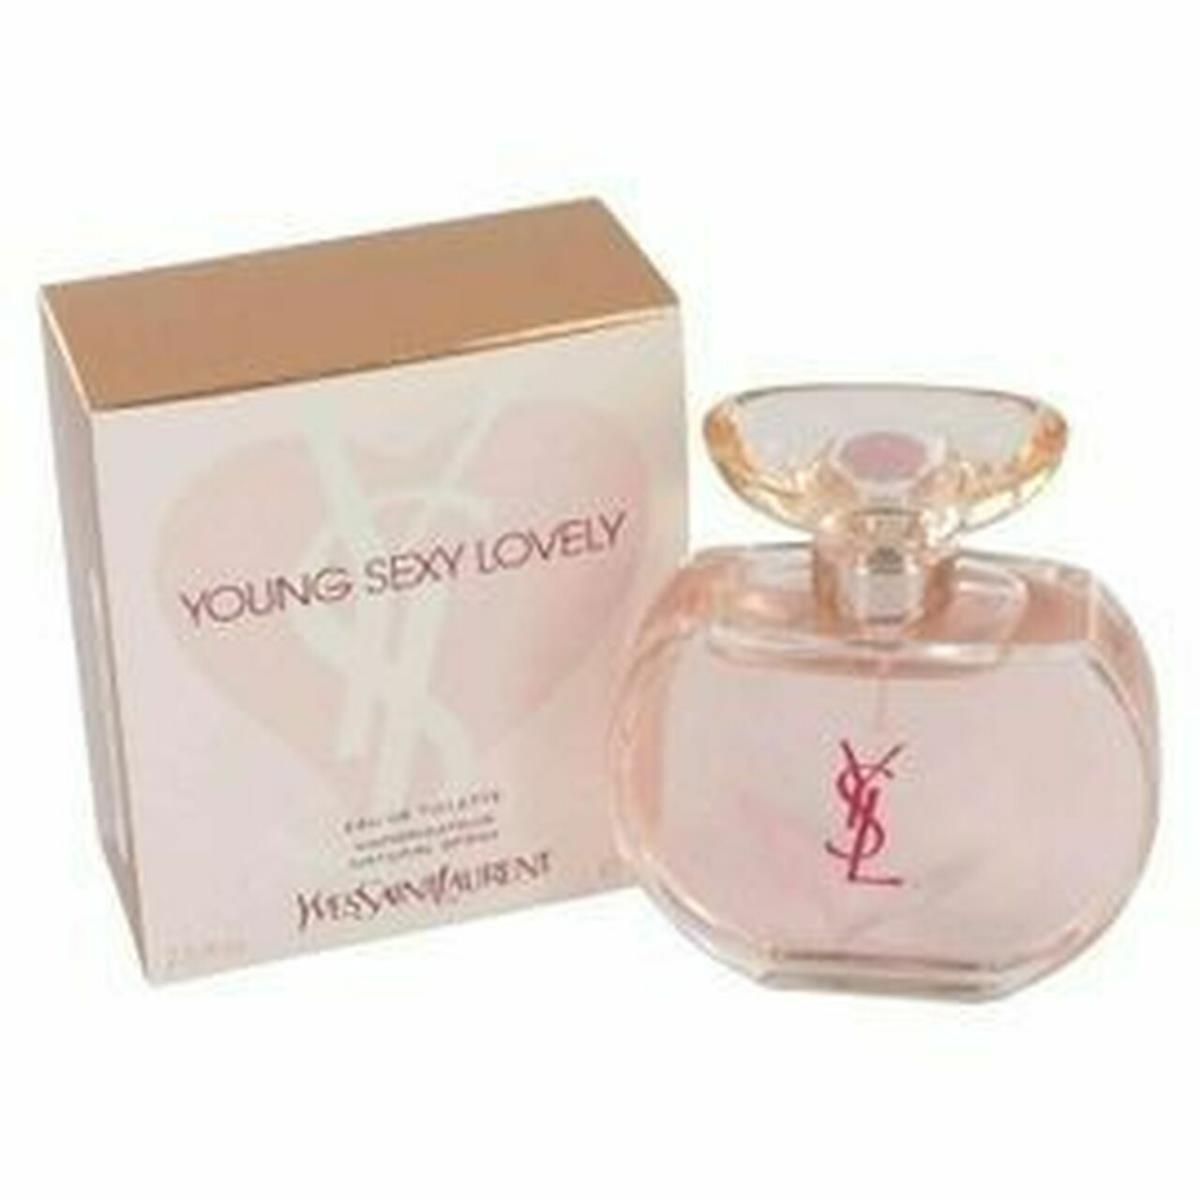 Young Sexy Lovely Perfume Yves Saint Laurent 1.7 Oz 50 ml Edt Spray